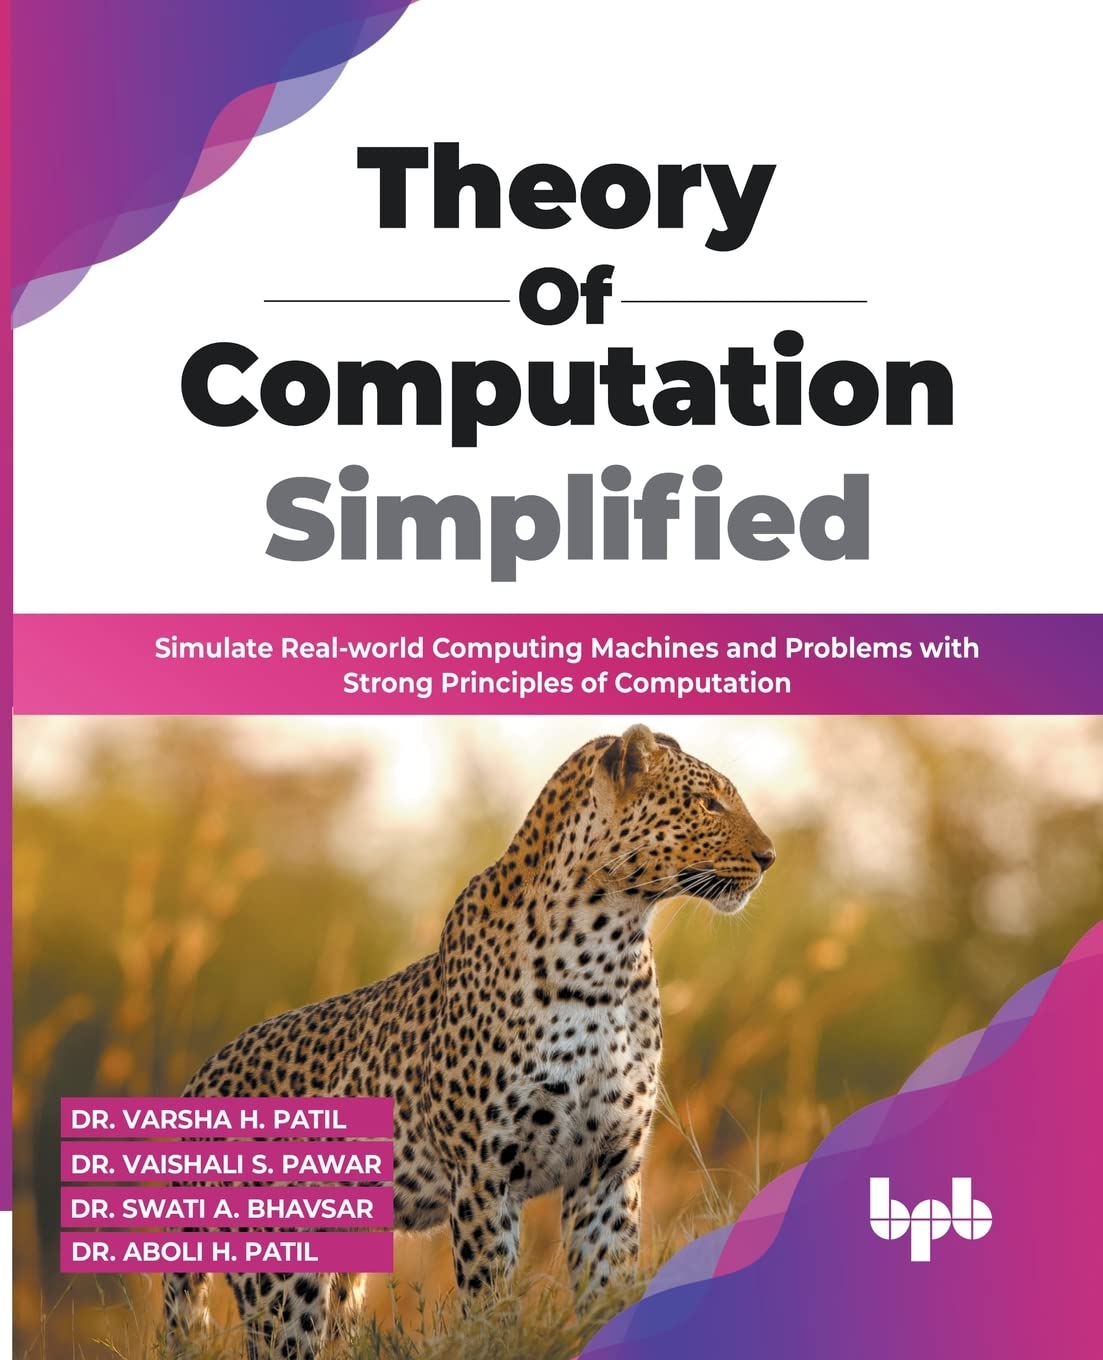 Theory of Computation Simplified: Simulate Real-world Computing Machines and Problems with Strong Principles of Computation by Dr Varsha H Patil